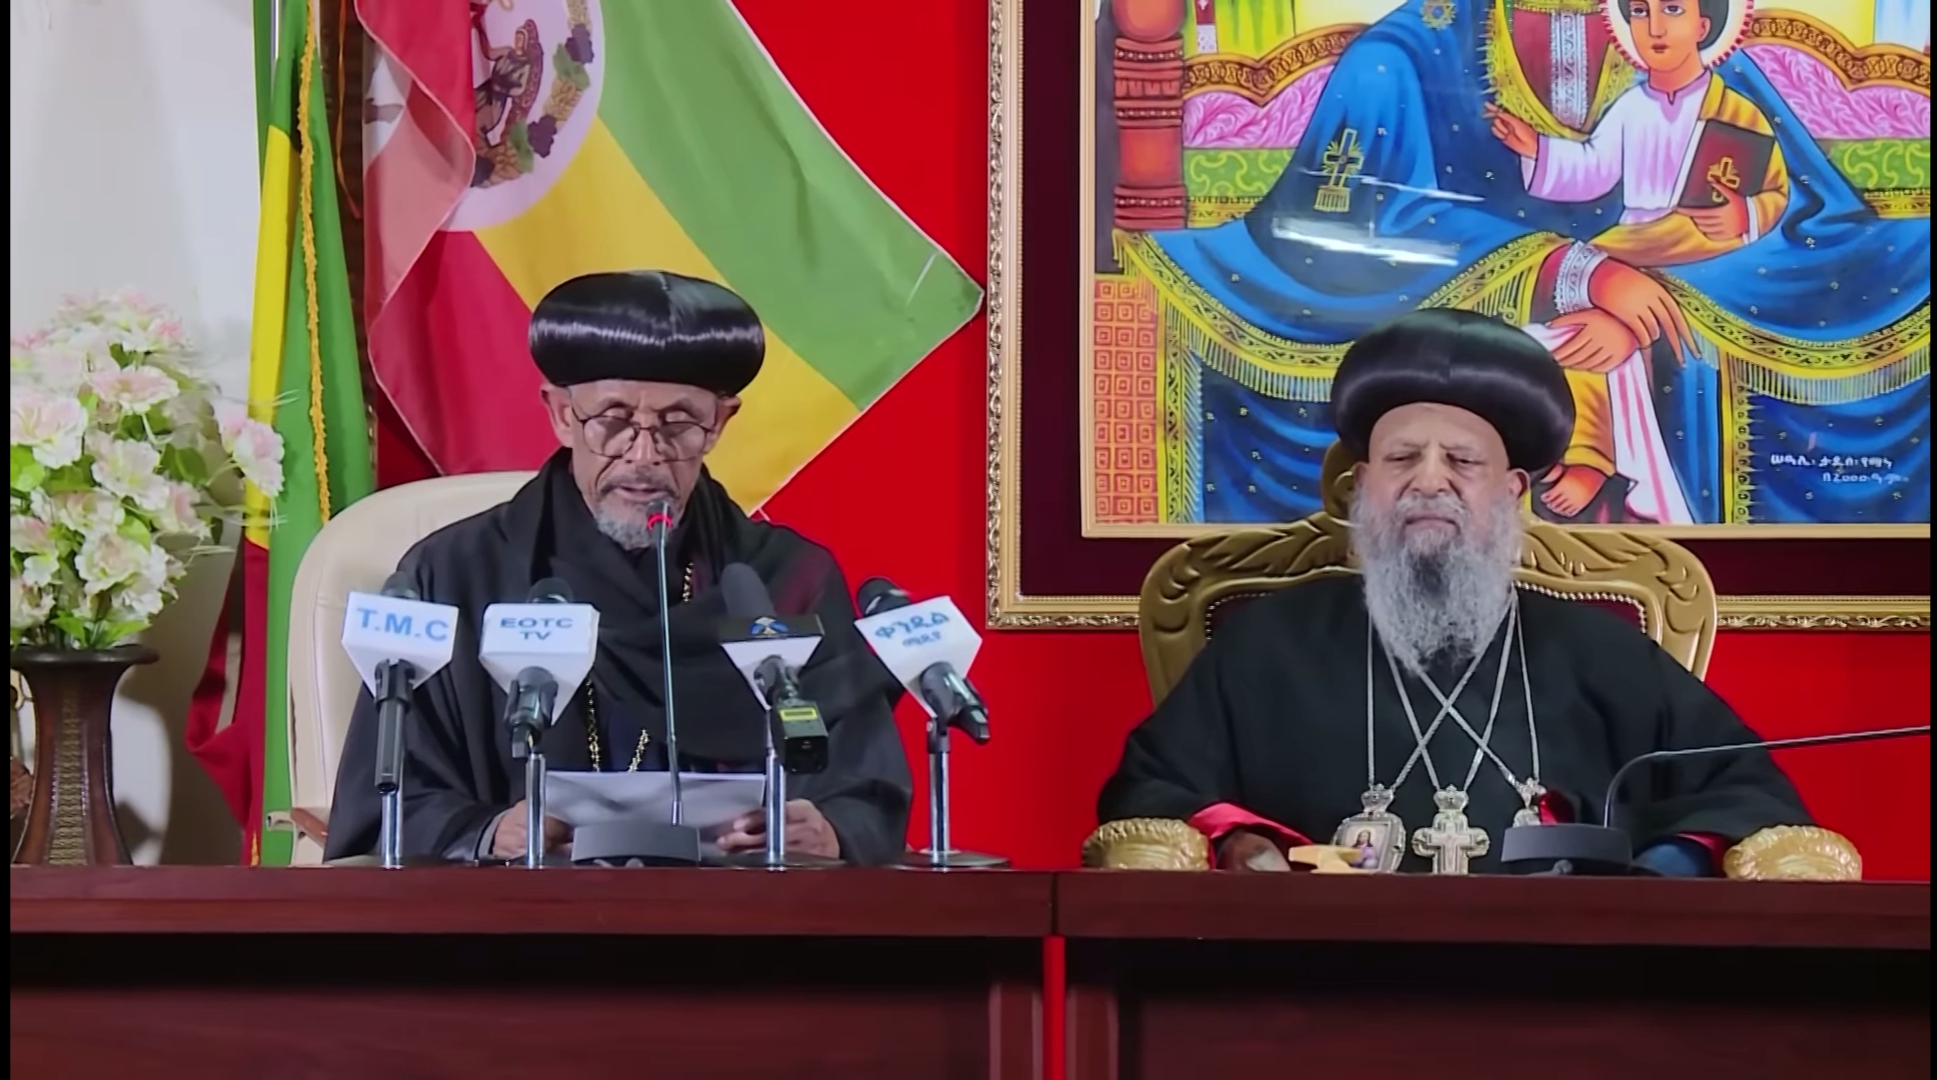 The Holy Synod of the Ethiopian Orthodox Tewahedo Church Excommunicated 4 Archbishops, 10 Monks, and 1 Clergyman